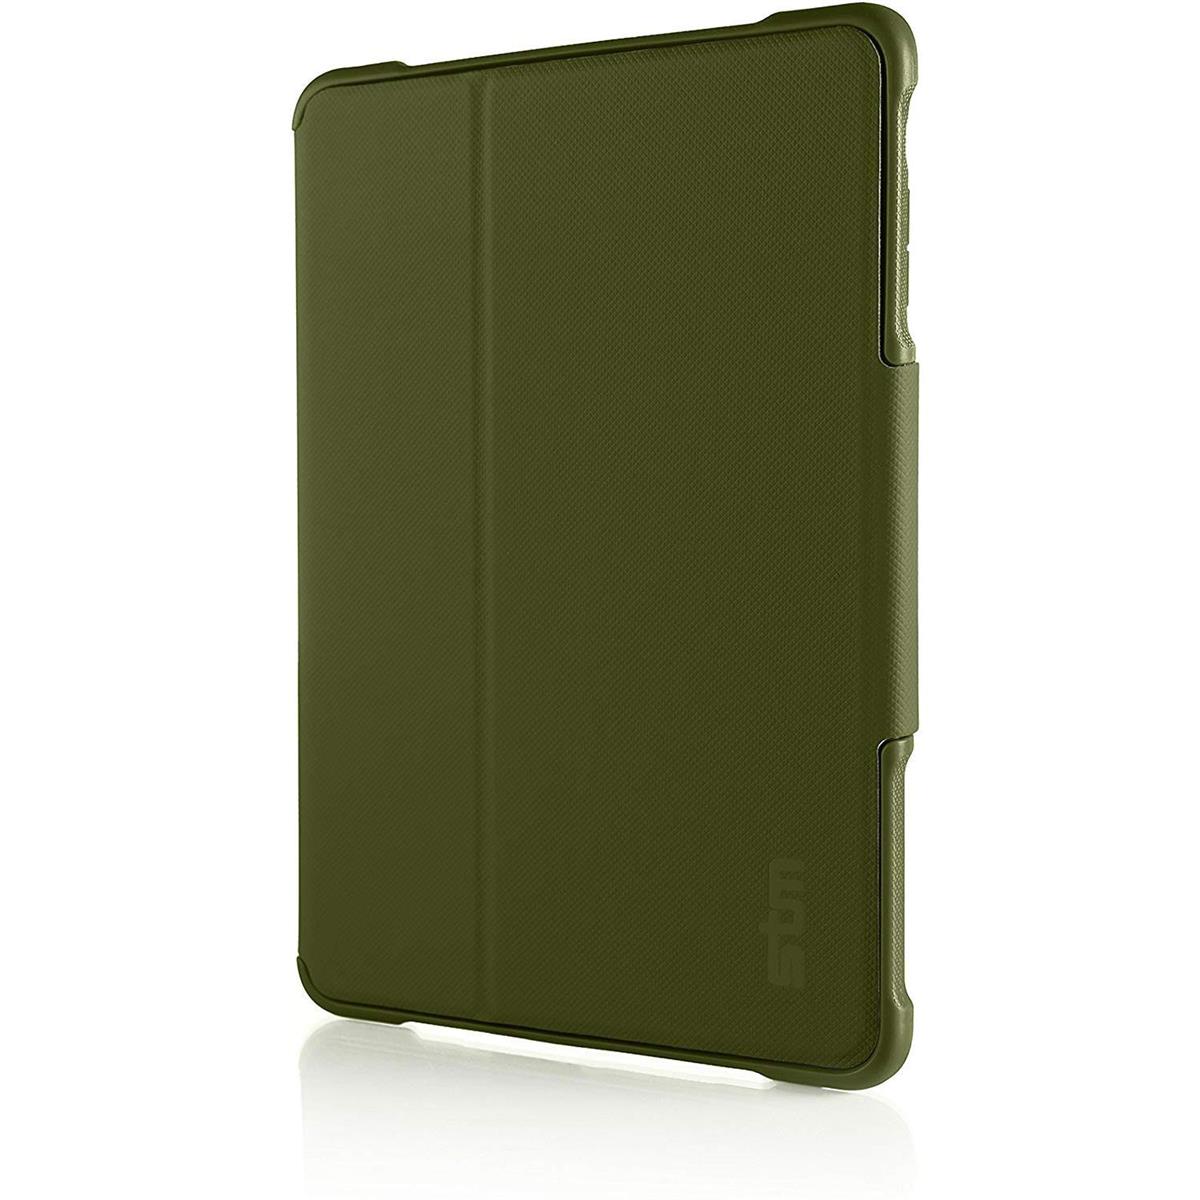 Image of STM Dux Case for iPad Air 2